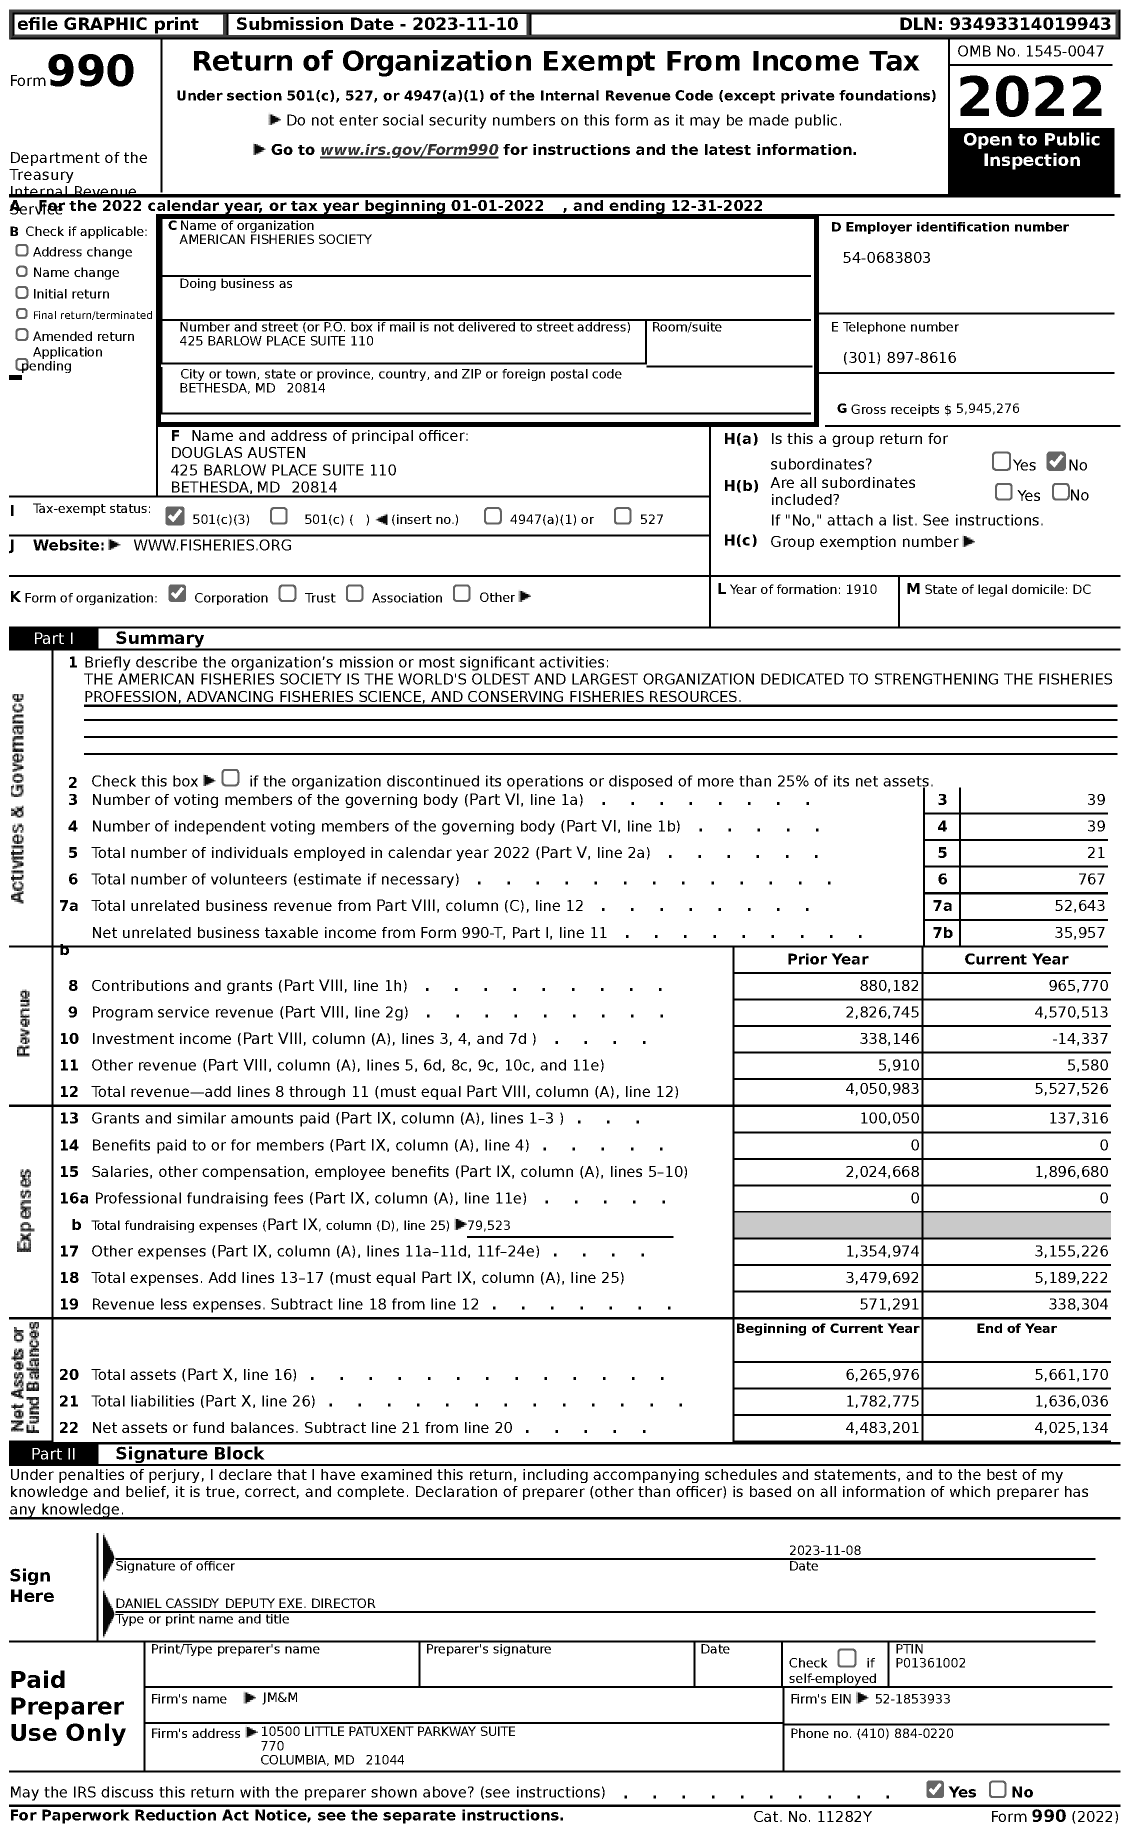 Image of first page of 2022 Form 990 for American Fisheries Society (AFS)